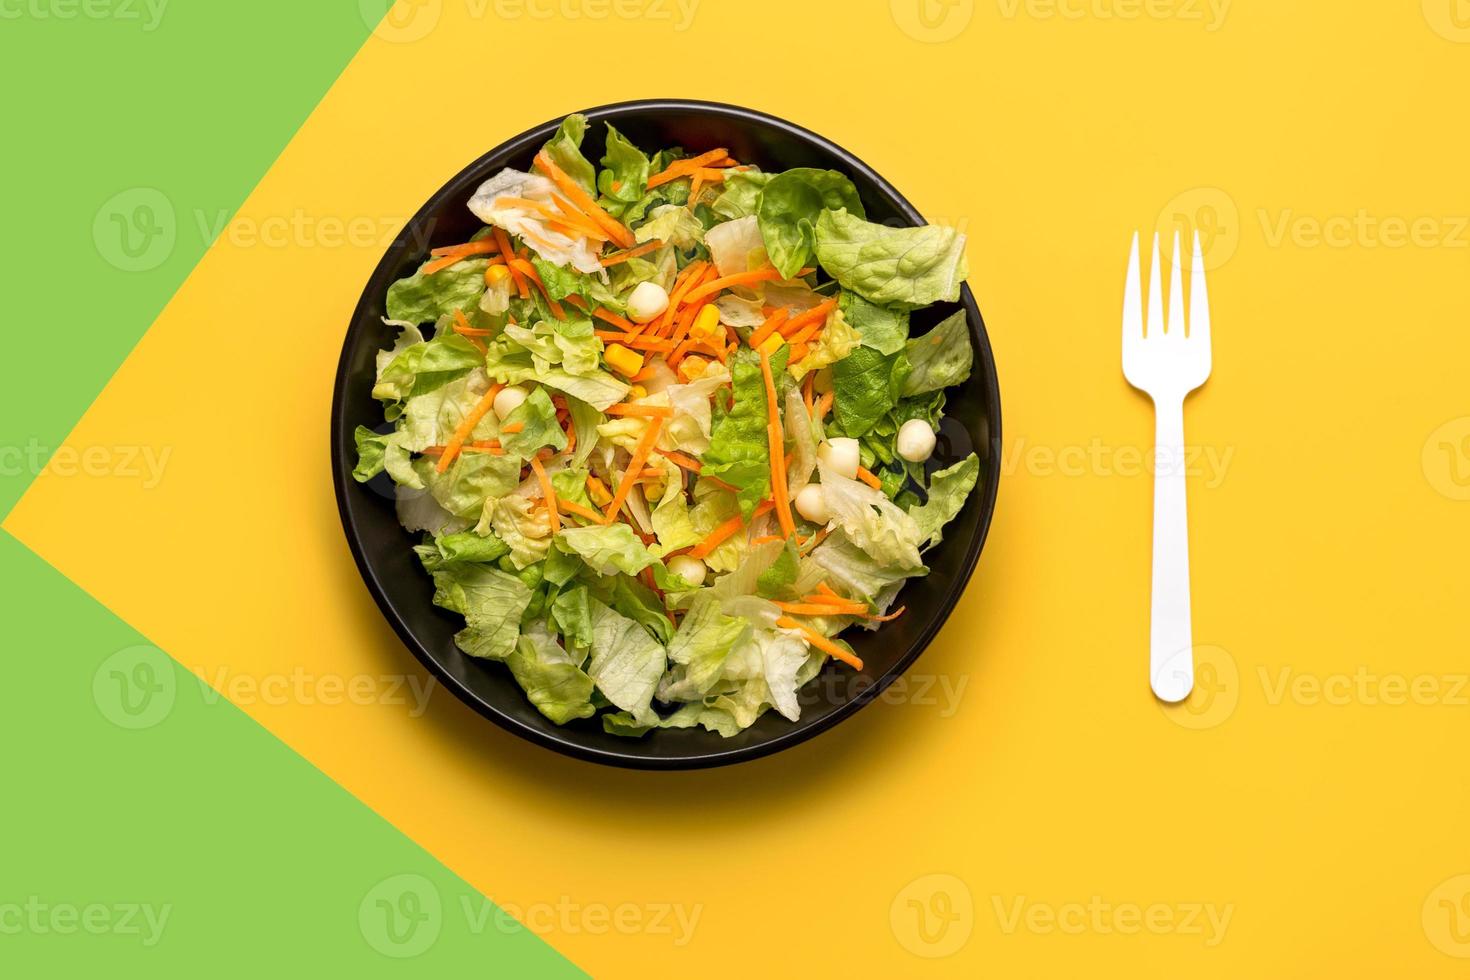 Lettuce salad with carrot,corn and cheese and white fork .Healthy food concept photo